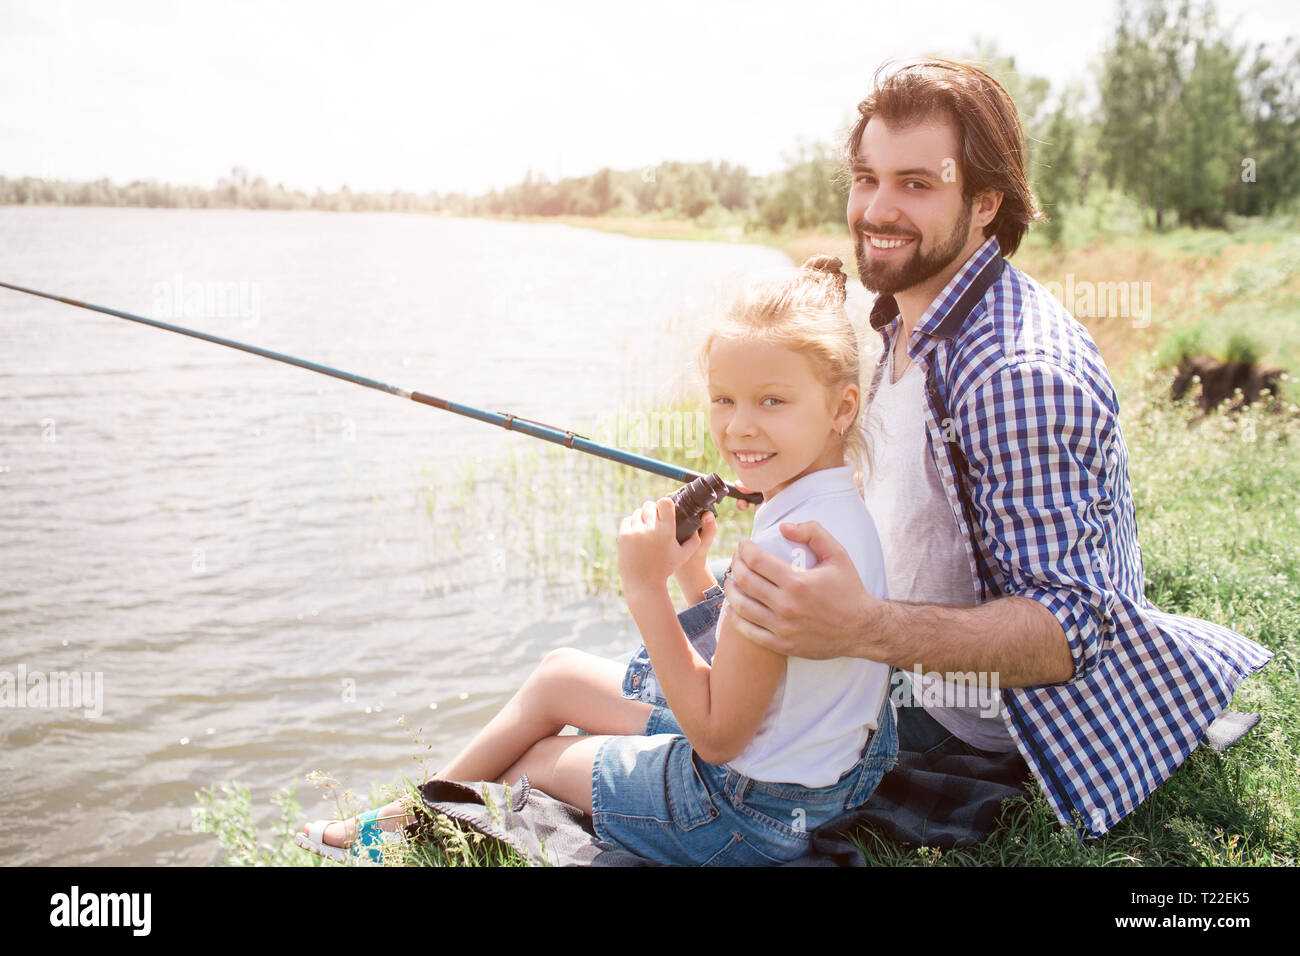 https://c8.alamy.com/comp/T22EK5/happy-dad-and-daughter-are-sitting-on-grass-near-water-and-looking-at-camera-he-is-huging-her-and-holding-fish-rod-in-right-hand-they-are-fishing-T22EK5.jpg